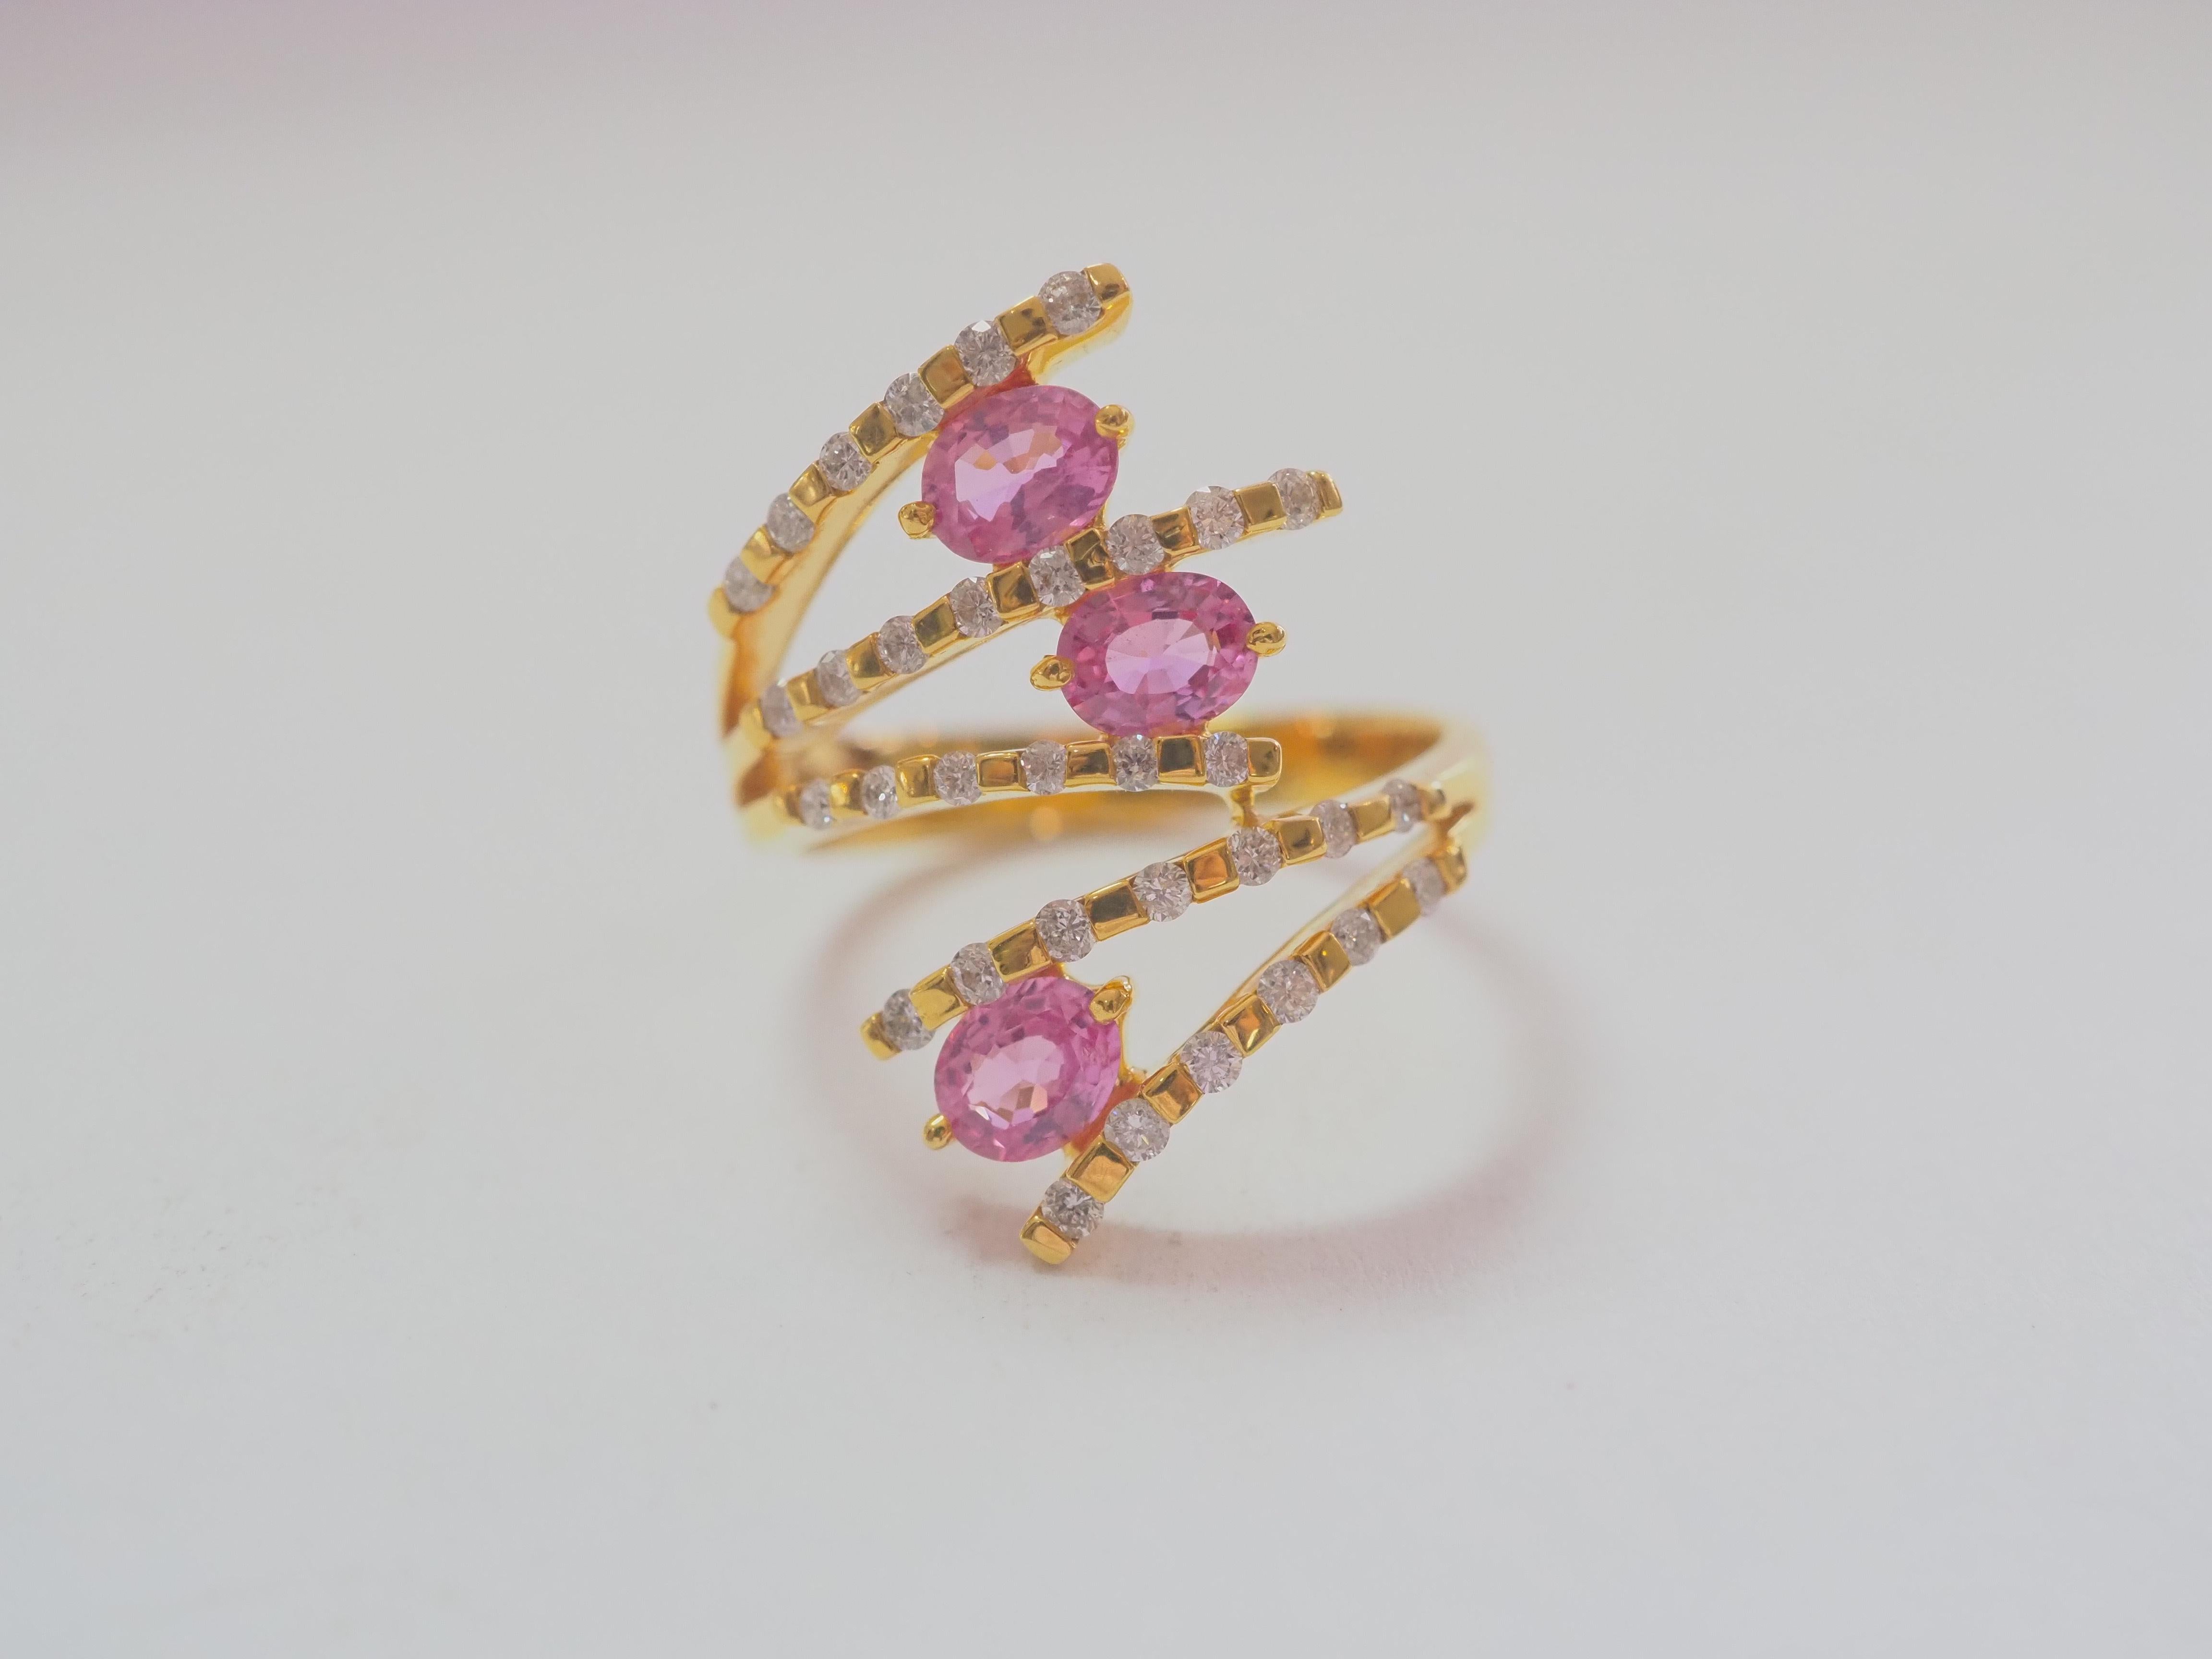 This quality and beautiful wide face cluster ring piece is an 18K solid yellow gold fine quality pink sapphire and diamond ring. 3 hot pink oval pink sapphires are set meticulously and all the same size with matching colors. The round diamonds on